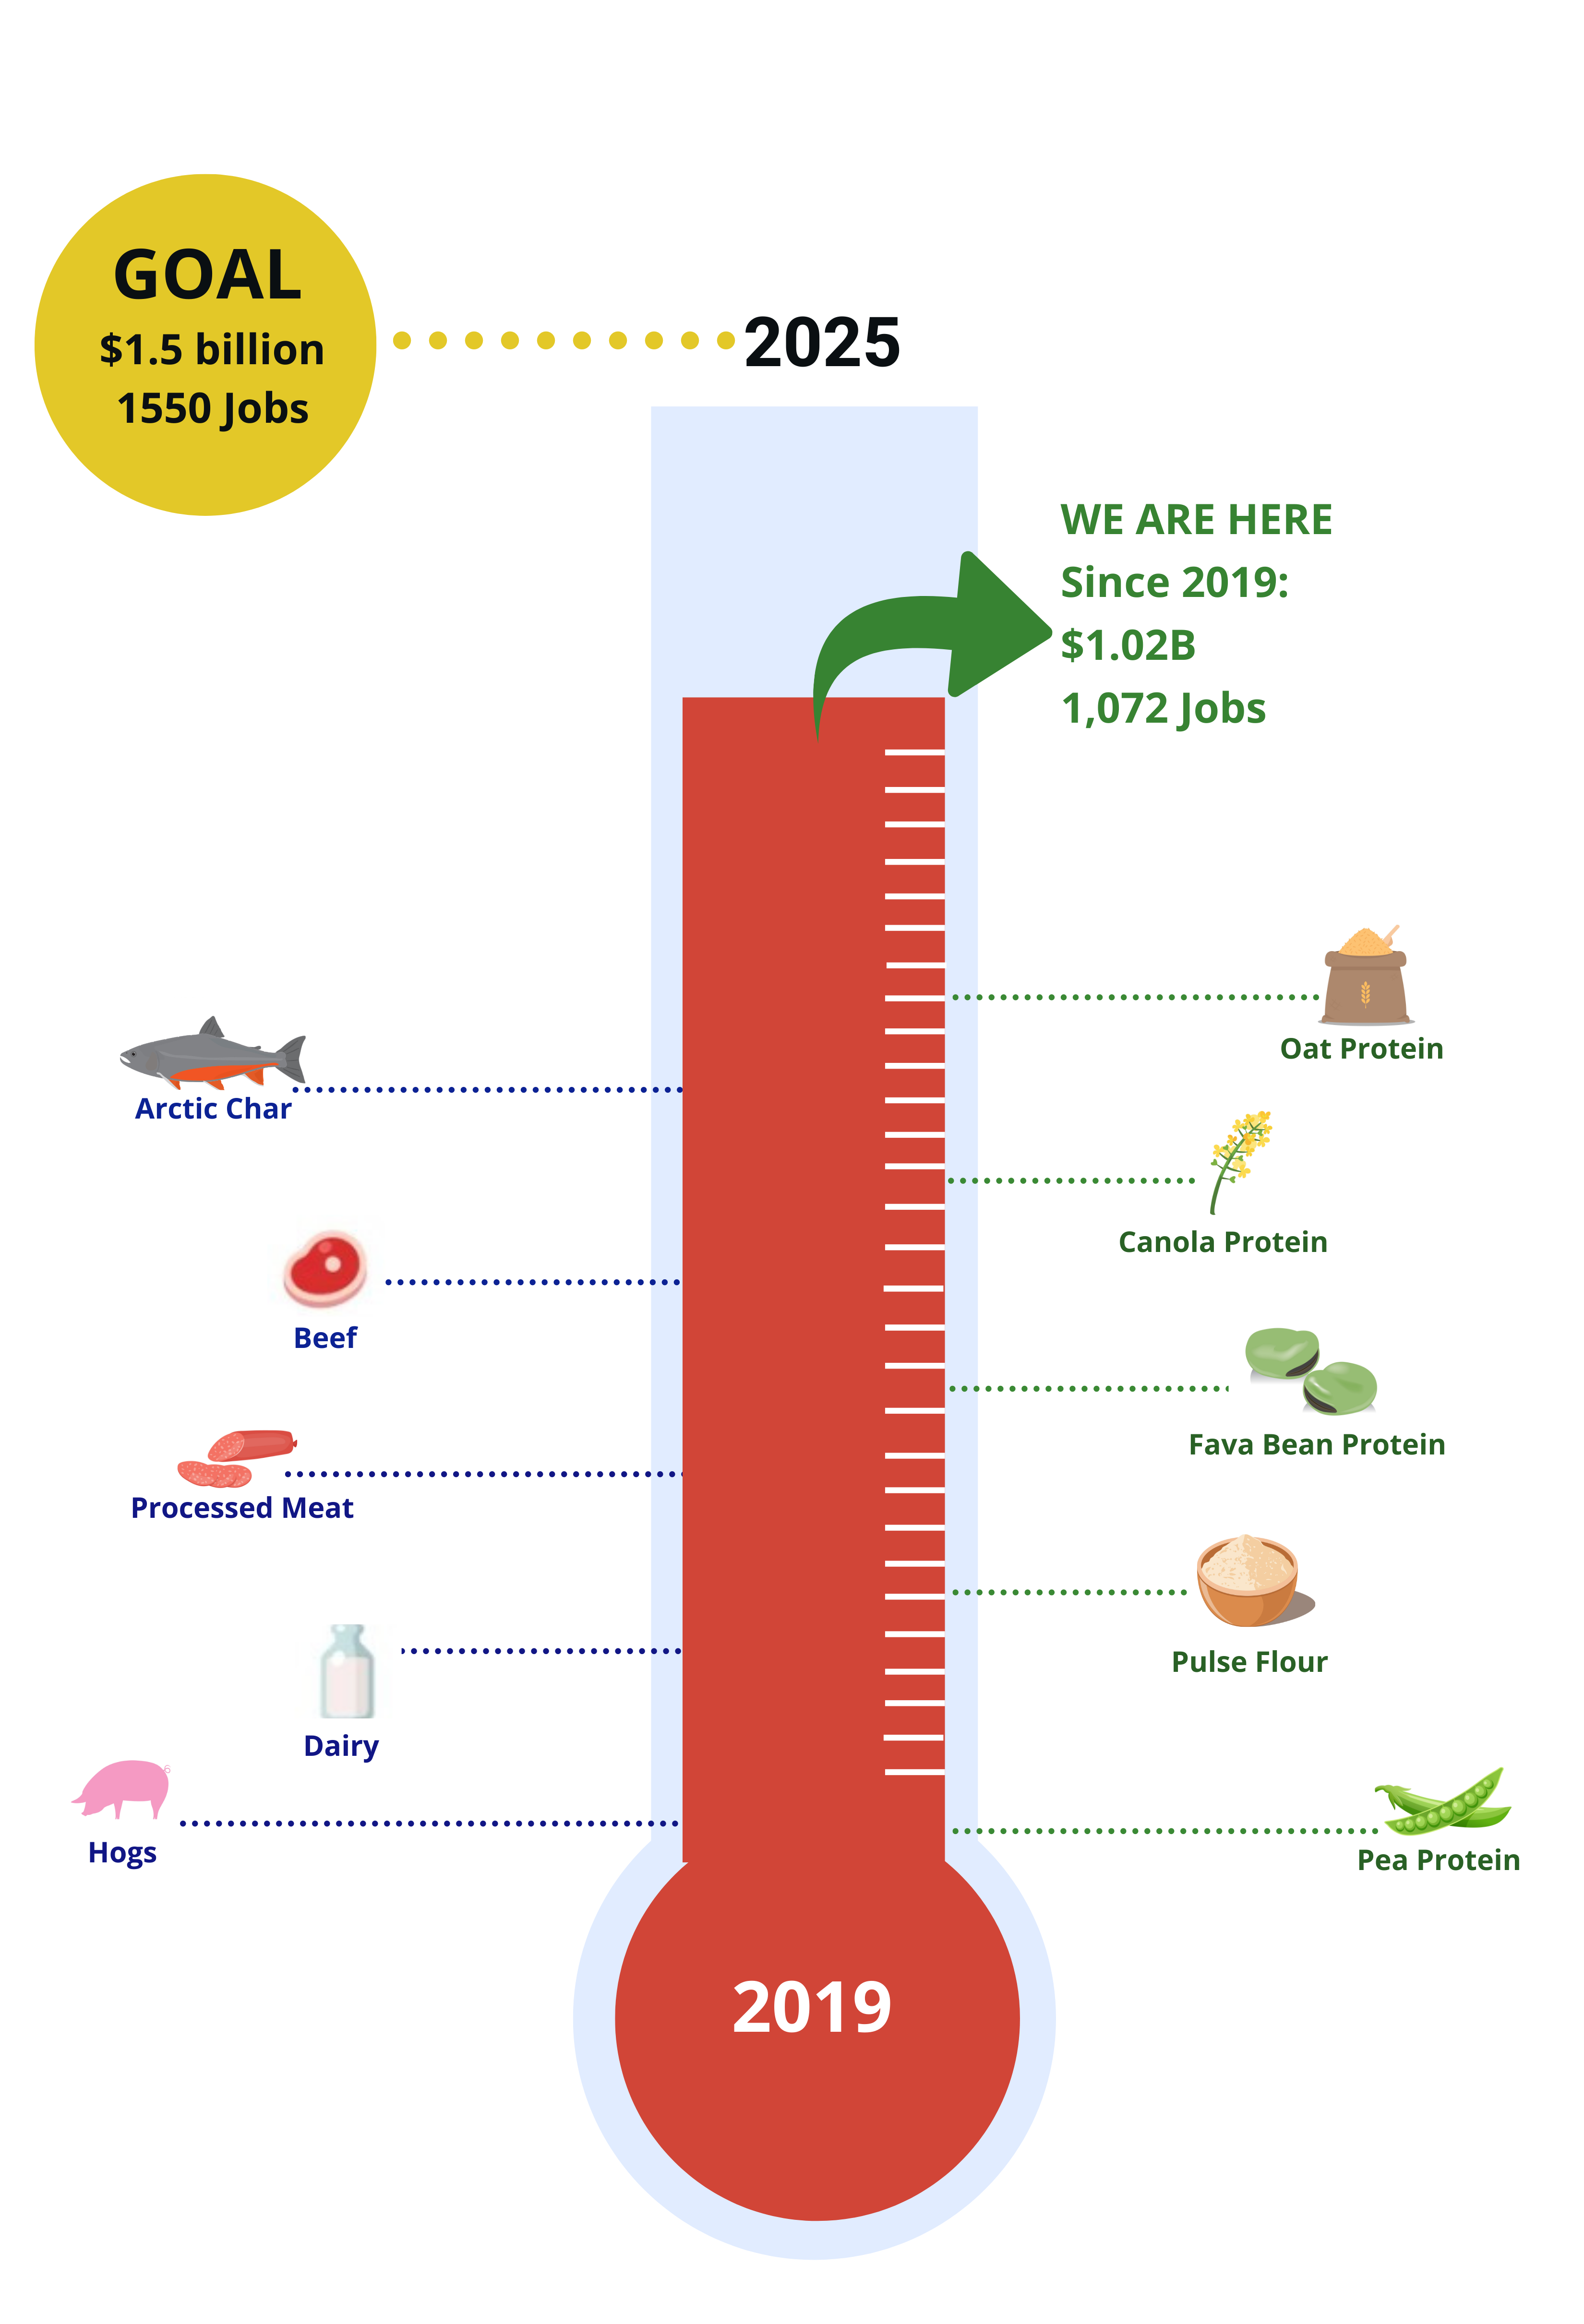 Picture of thermometer to show MPA strategy growth.